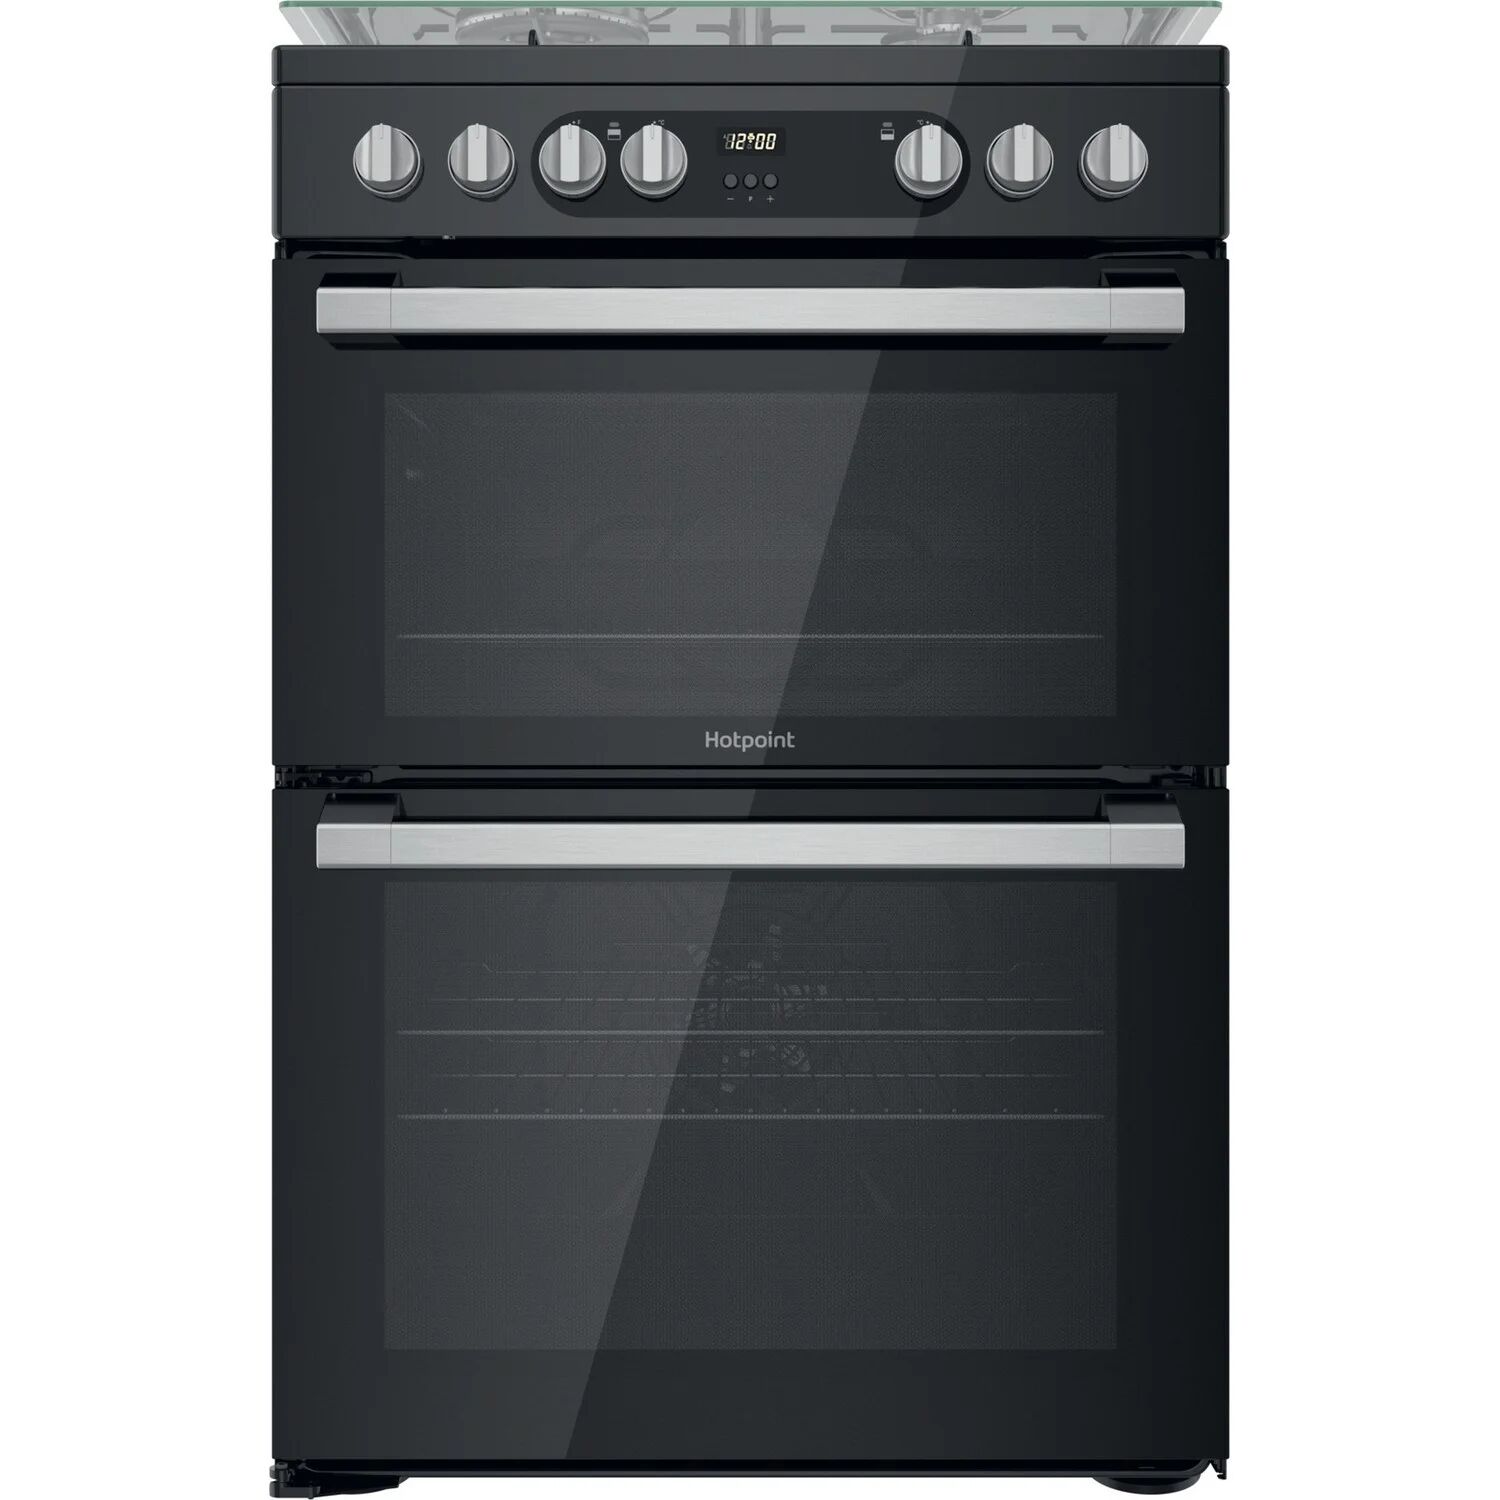 Hotpoint 60cm Double Oven Dual Fuel Cooker - Black